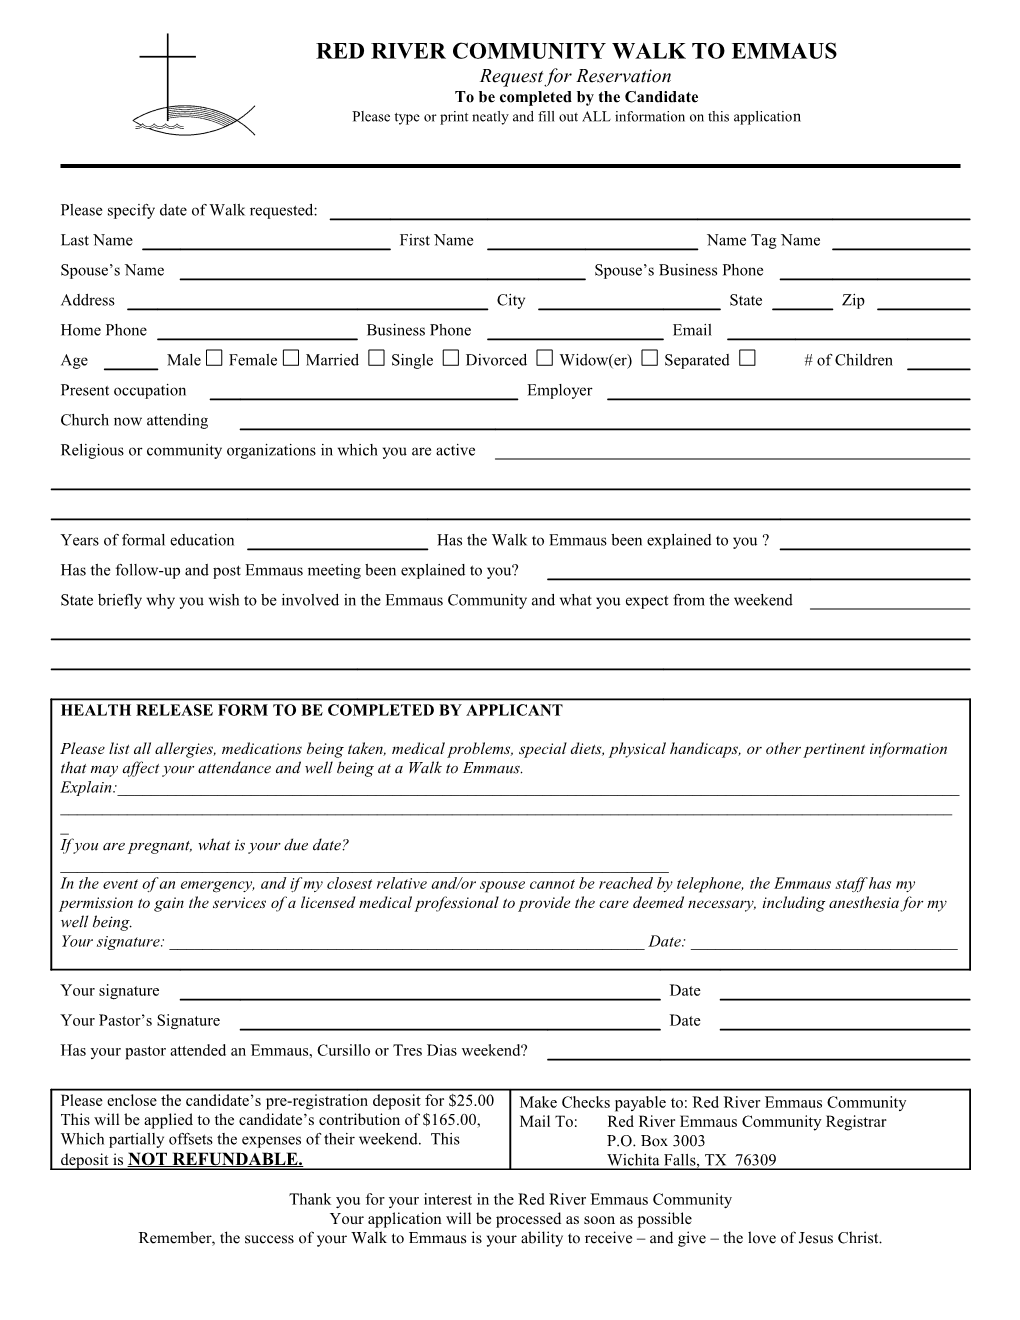 Health Release Form to Be Completed by Applicant